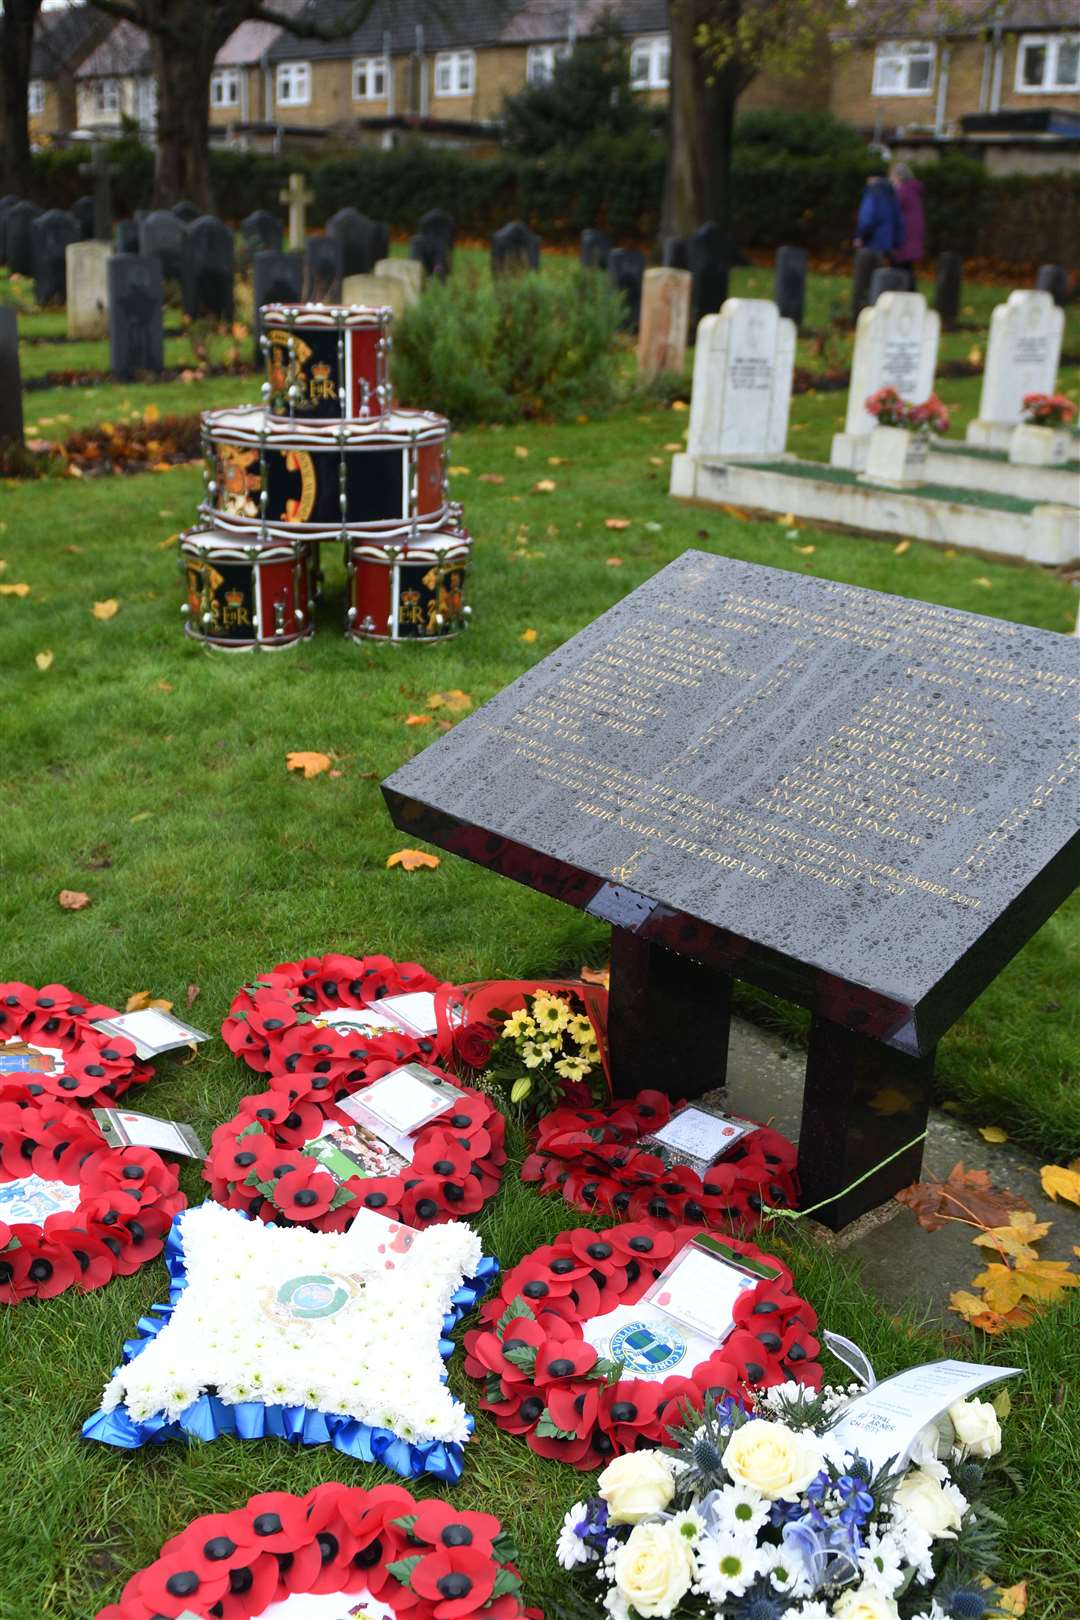 70th anniversary of Dock Road tragedy when 24 marine cadets lost their lives in a bus crash recognised in service at Woodlands Cemetery in Gillingham. Picture: Barry Goodwin